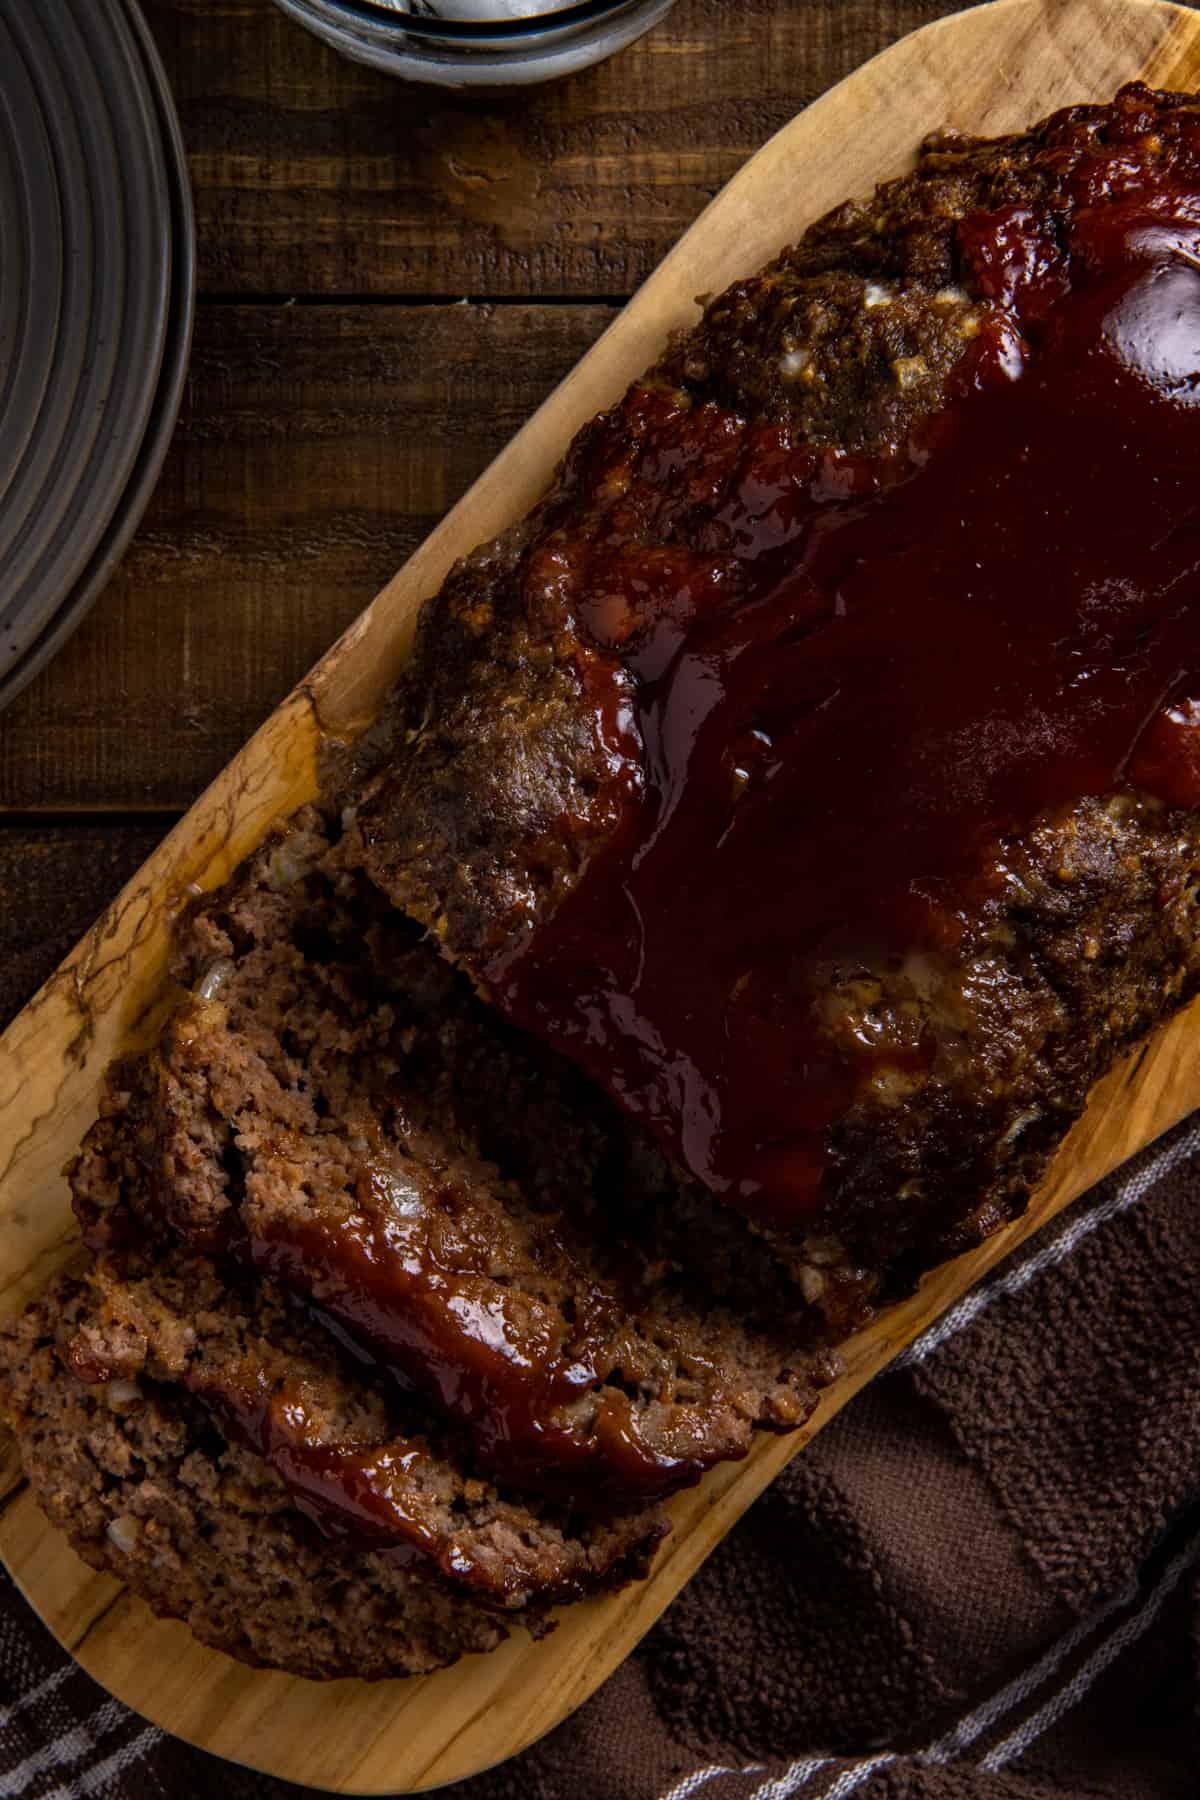 Baked meatloaf on wooden platter with a few slices revealed. Meatloaf sauce on top and running down the sides a little.